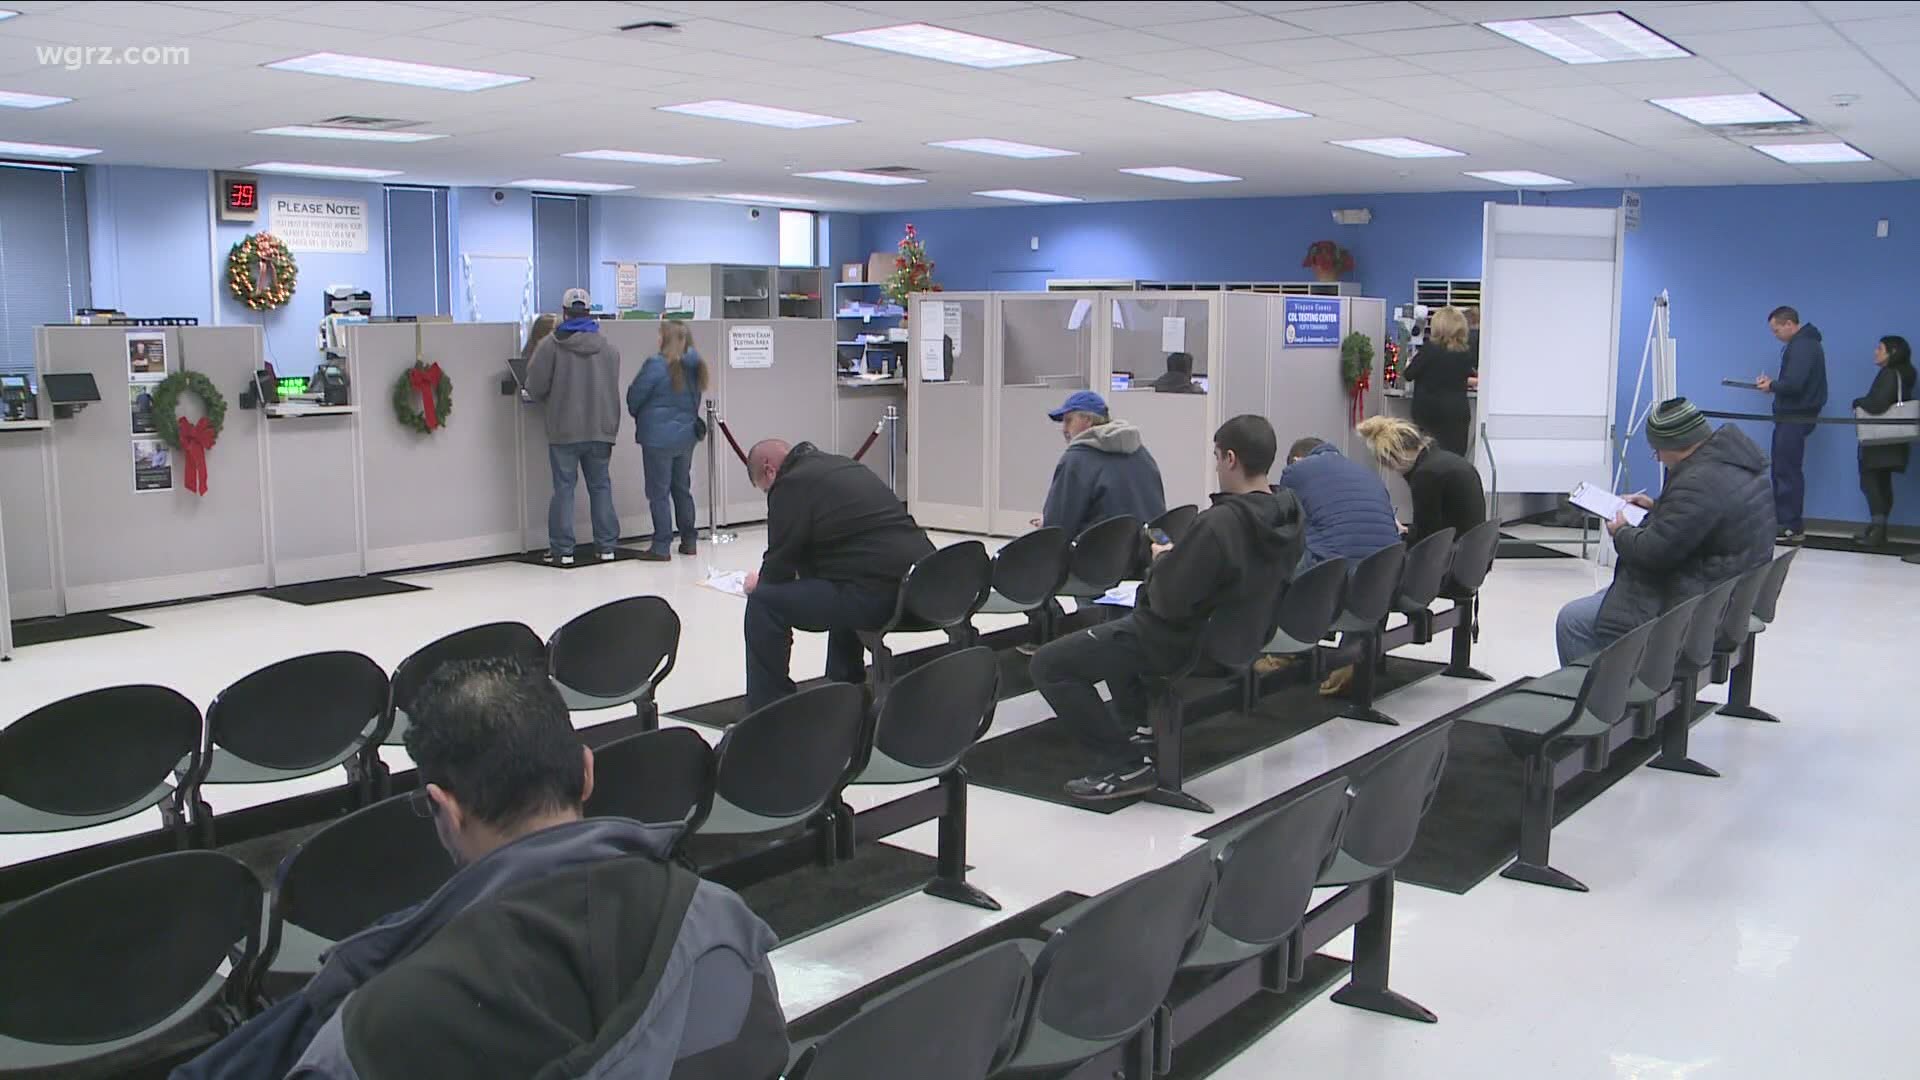 The Niagara Falls dmv will begin accepting appointments for all transactions starting tomorrow.